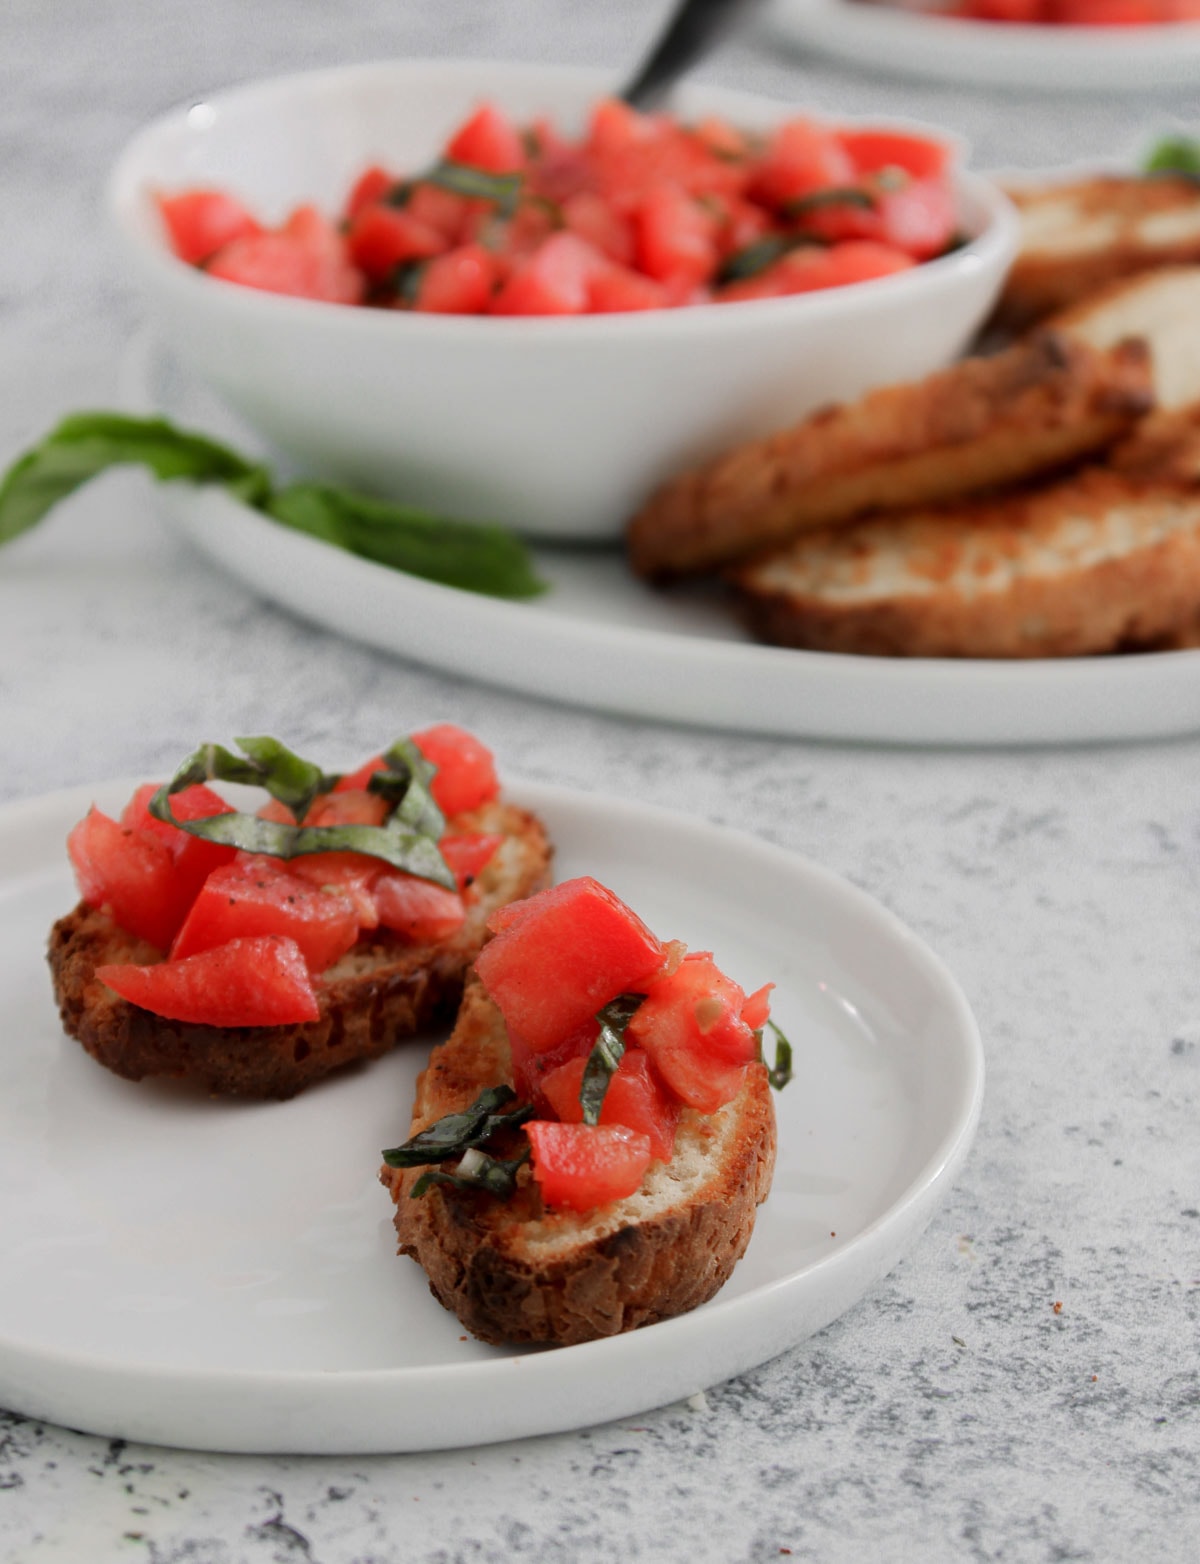 Toasted French bread topped with Bruschetta Dip